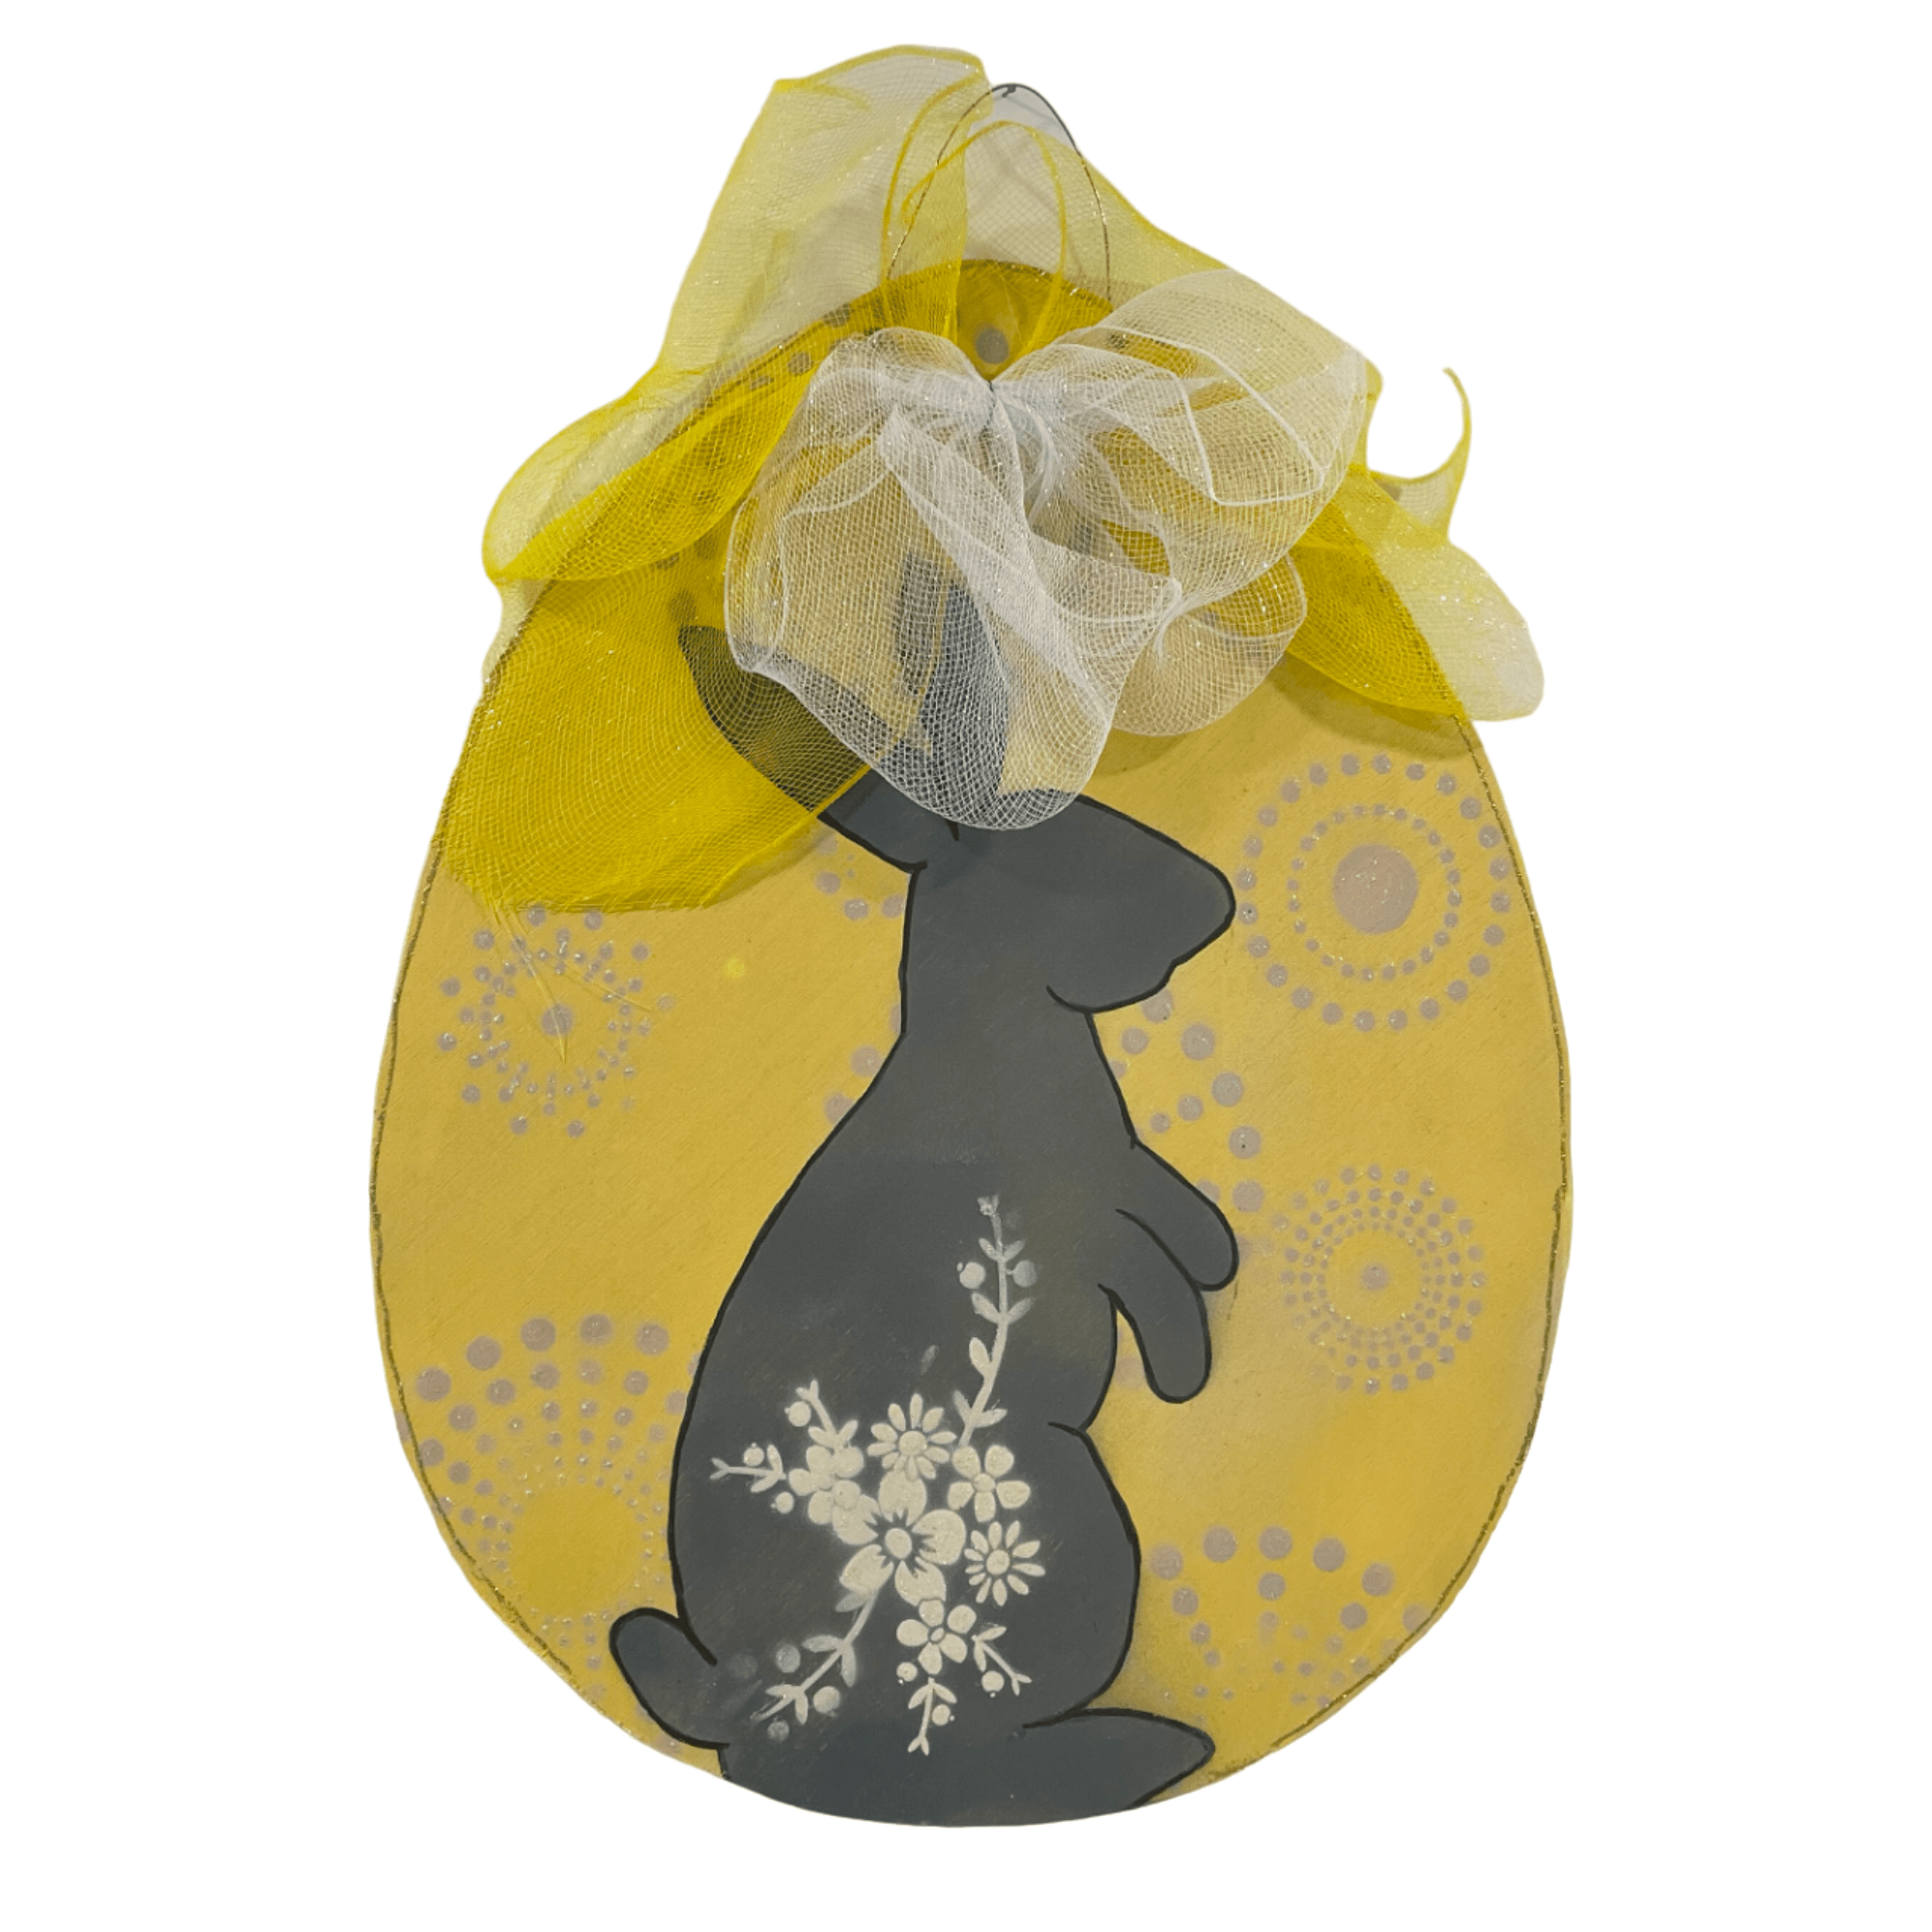 Toodle Lou Designs Toodle Lou Designs Egg With Bunny Silhouette Wooden Door Hanger - Little Miss Muffin Children & Home